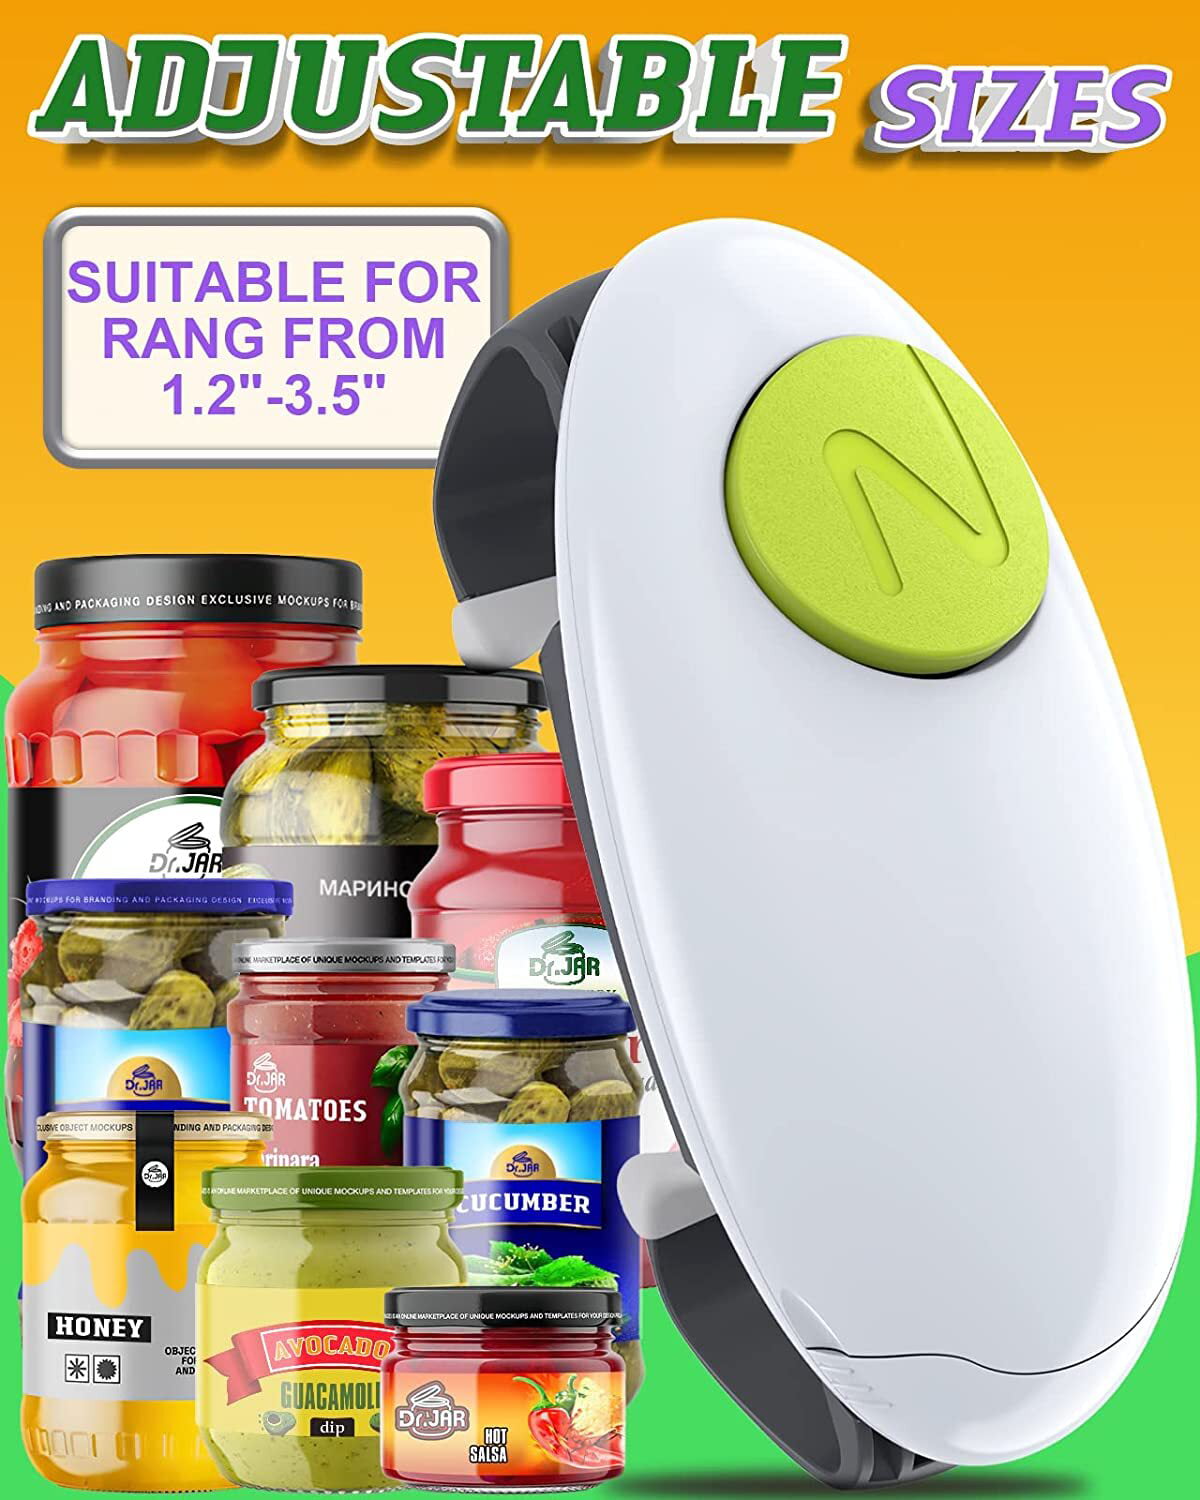 Sutify Electric Jar Opener, One Touch Automatic Jar Opener for New Sealed  Jars, Works for All Kinds of Jars, Jar Opener for Weak Hands, Seniors